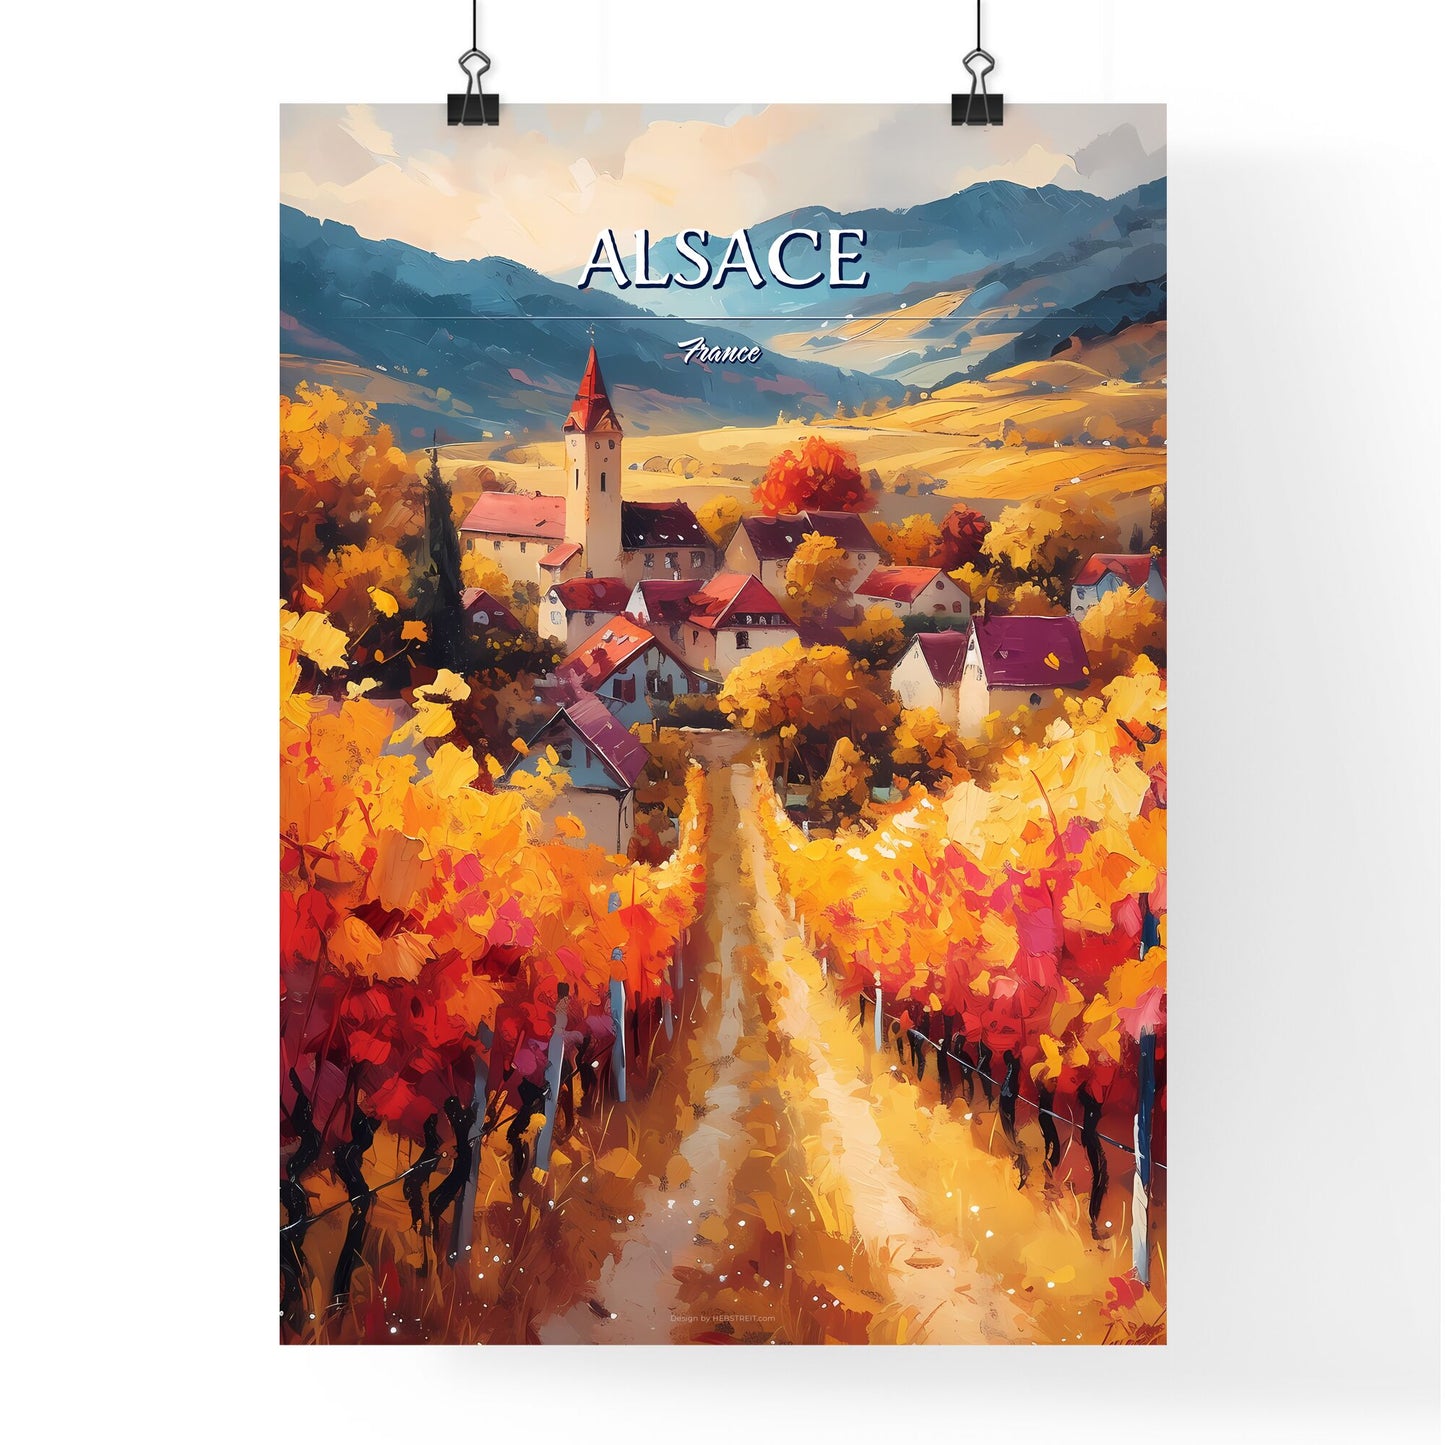 Alsace, France - Art print of a painting of a village in a vineyard Default Title